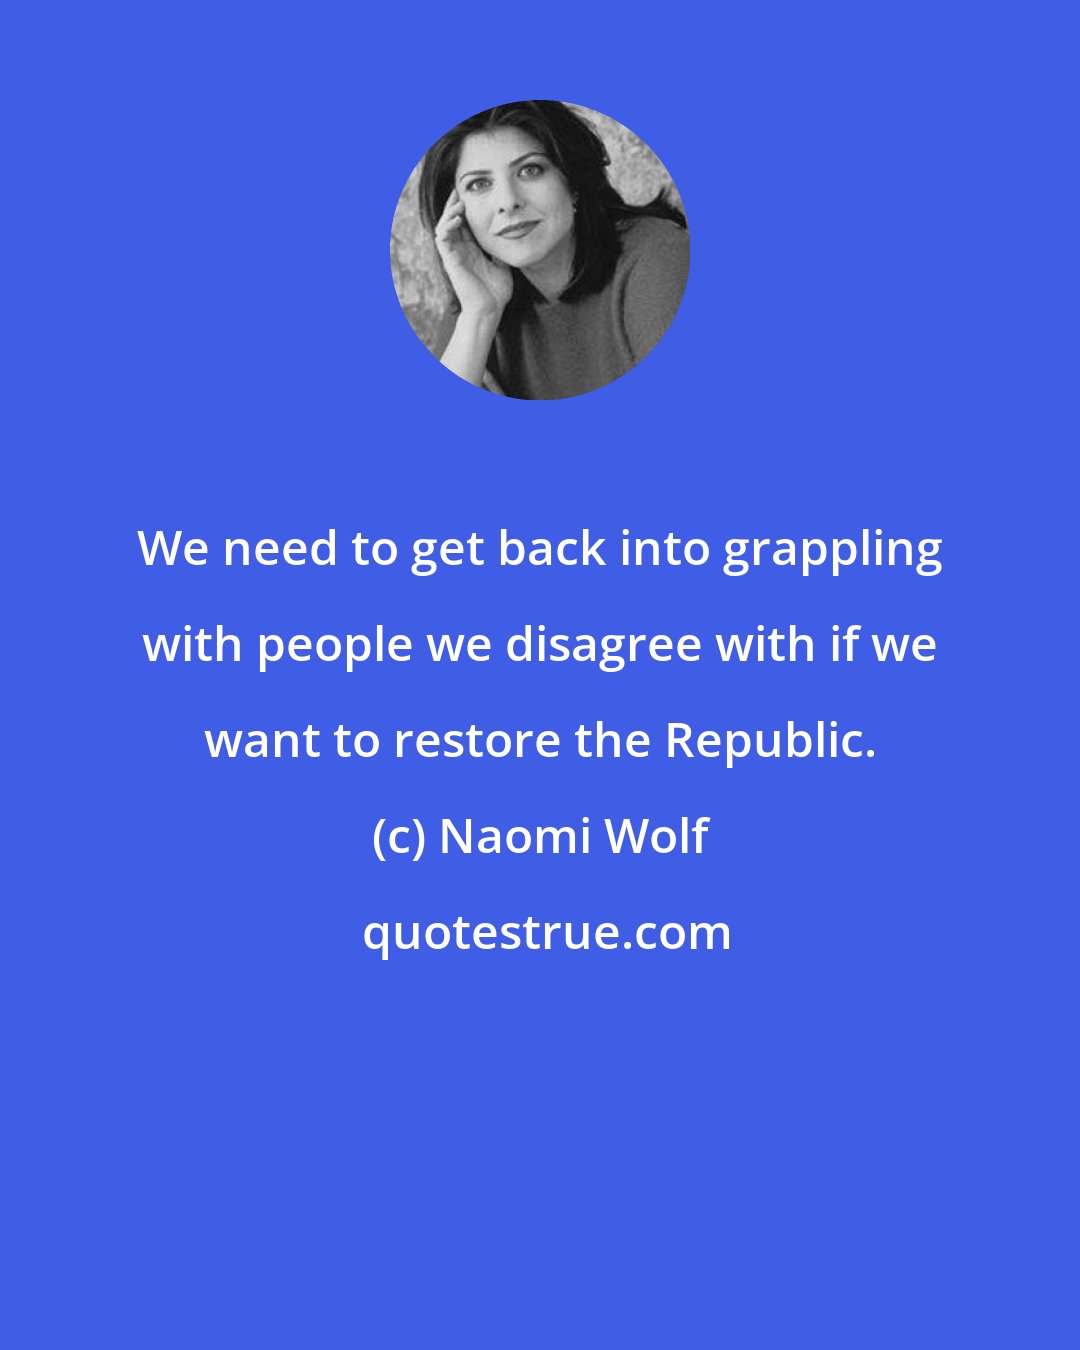 Naomi Wolf: We need to get back into grappling with people we disagree with if we want to restore the Republic.